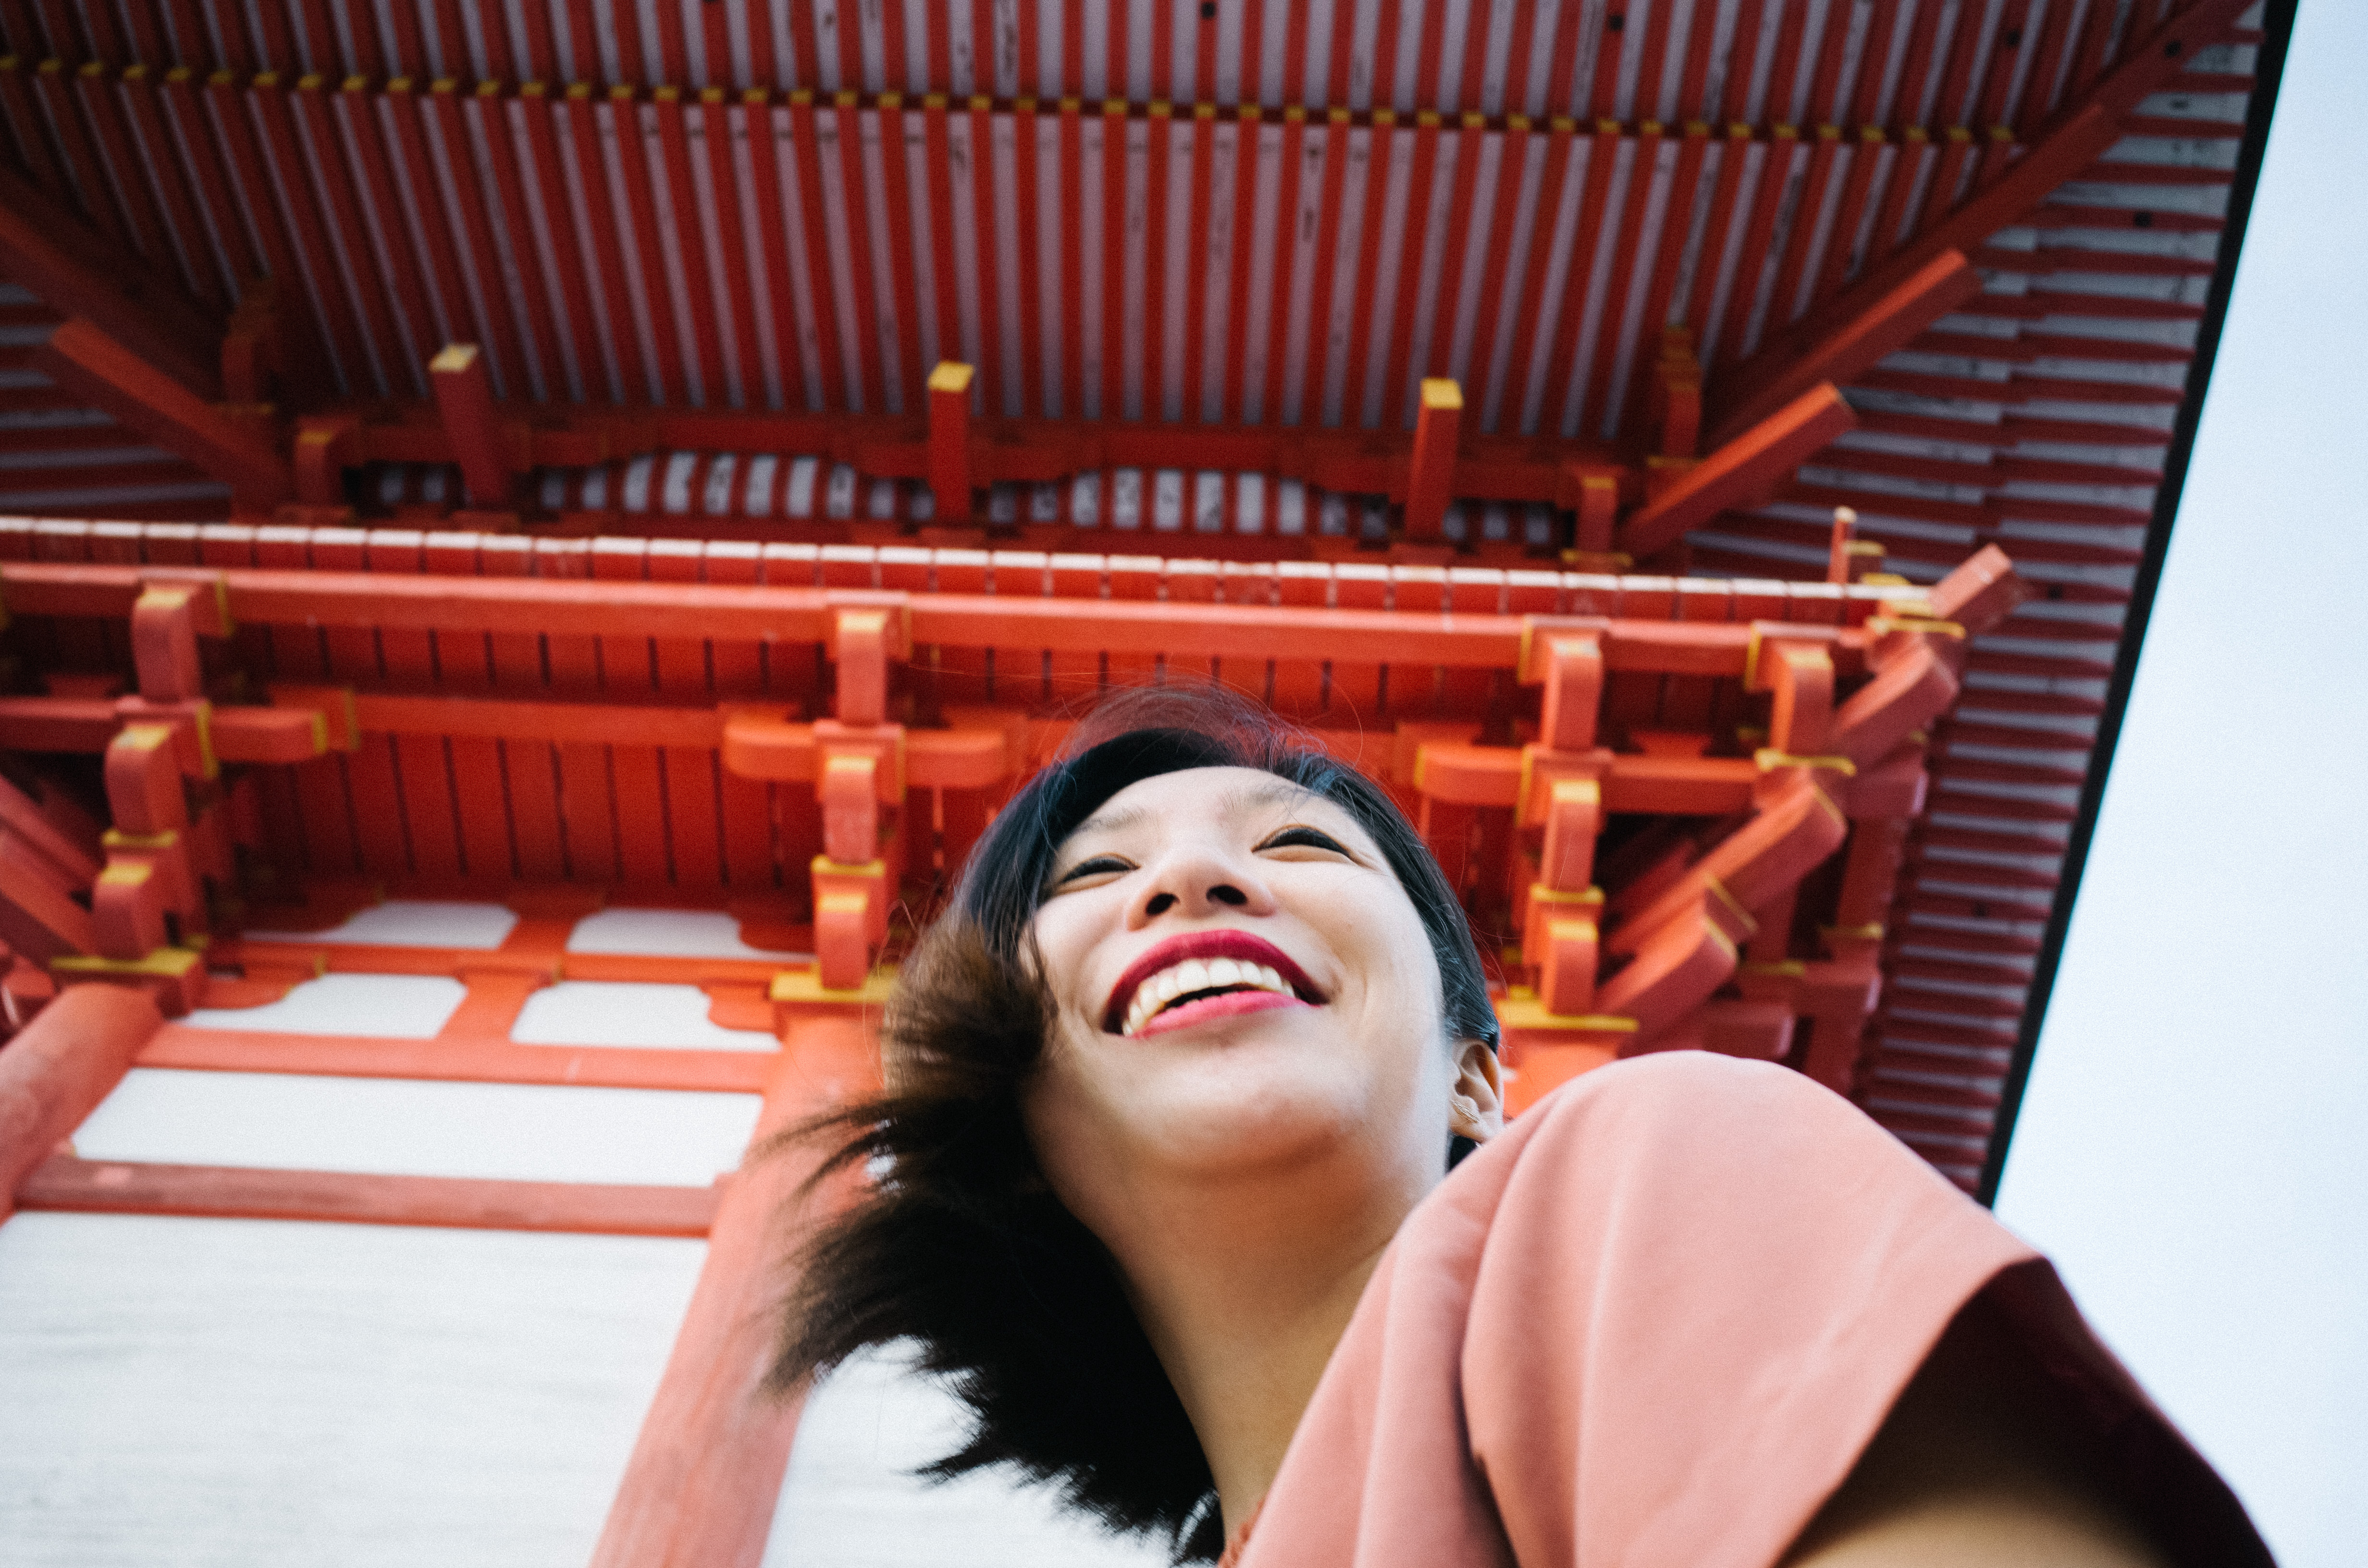 Cindy laughing at red shrine. Kyoto, 2017.